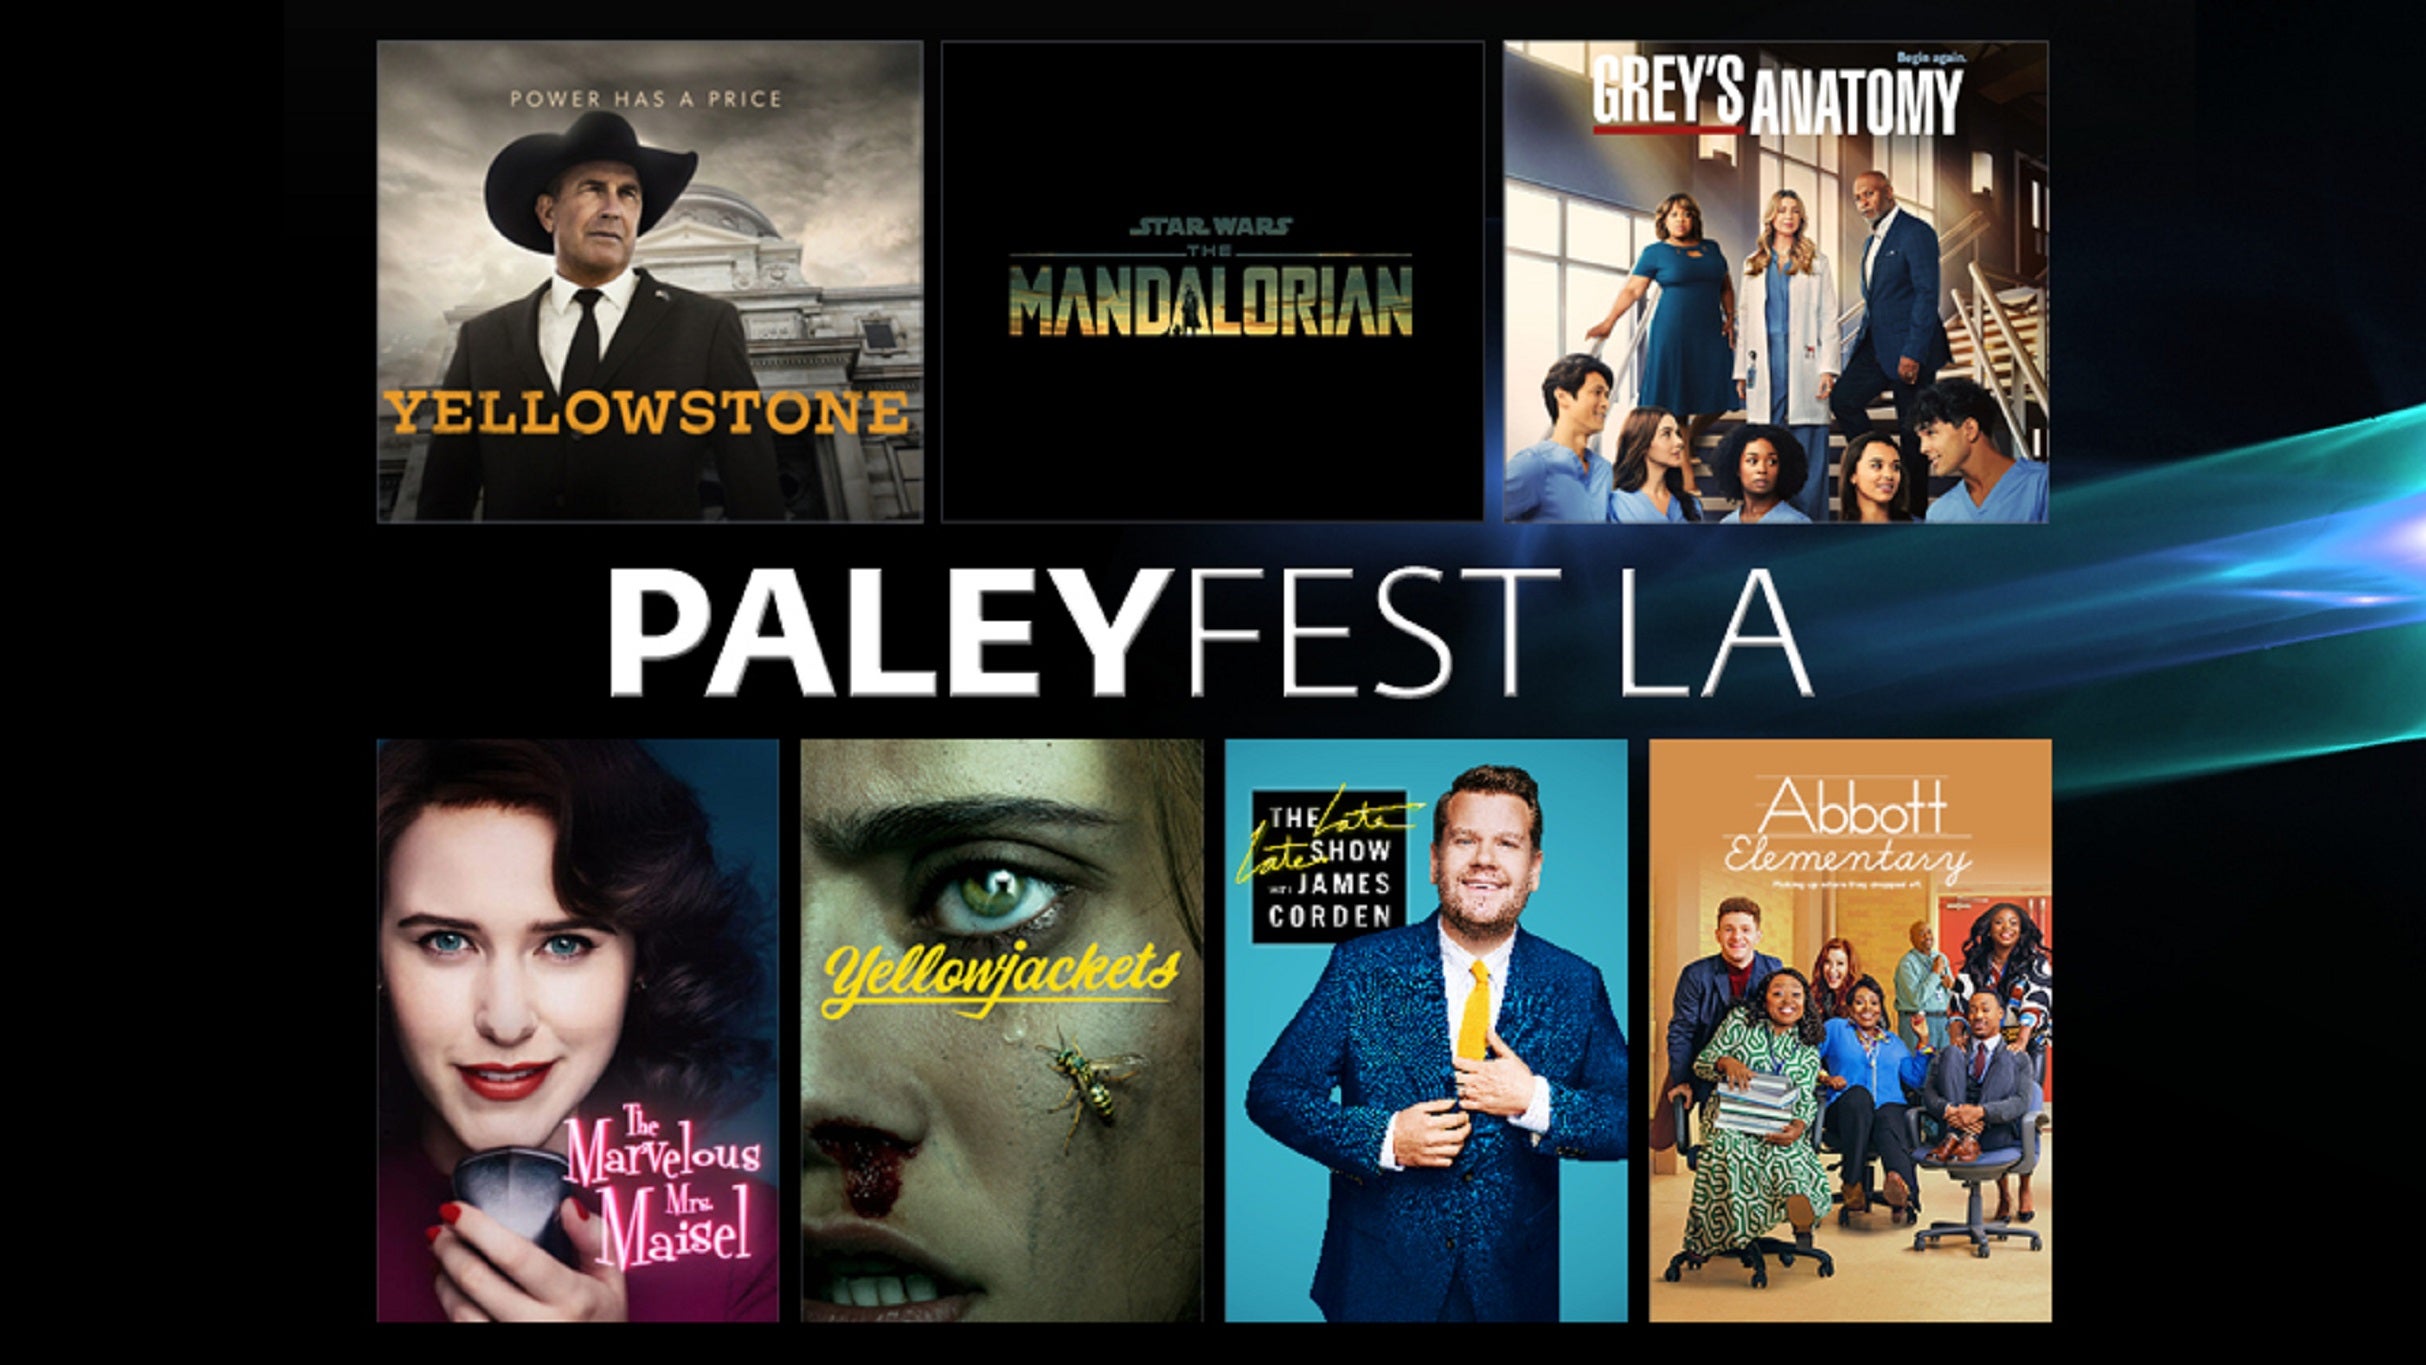 PaleyFest: Yellowstone at Dolby Theatre